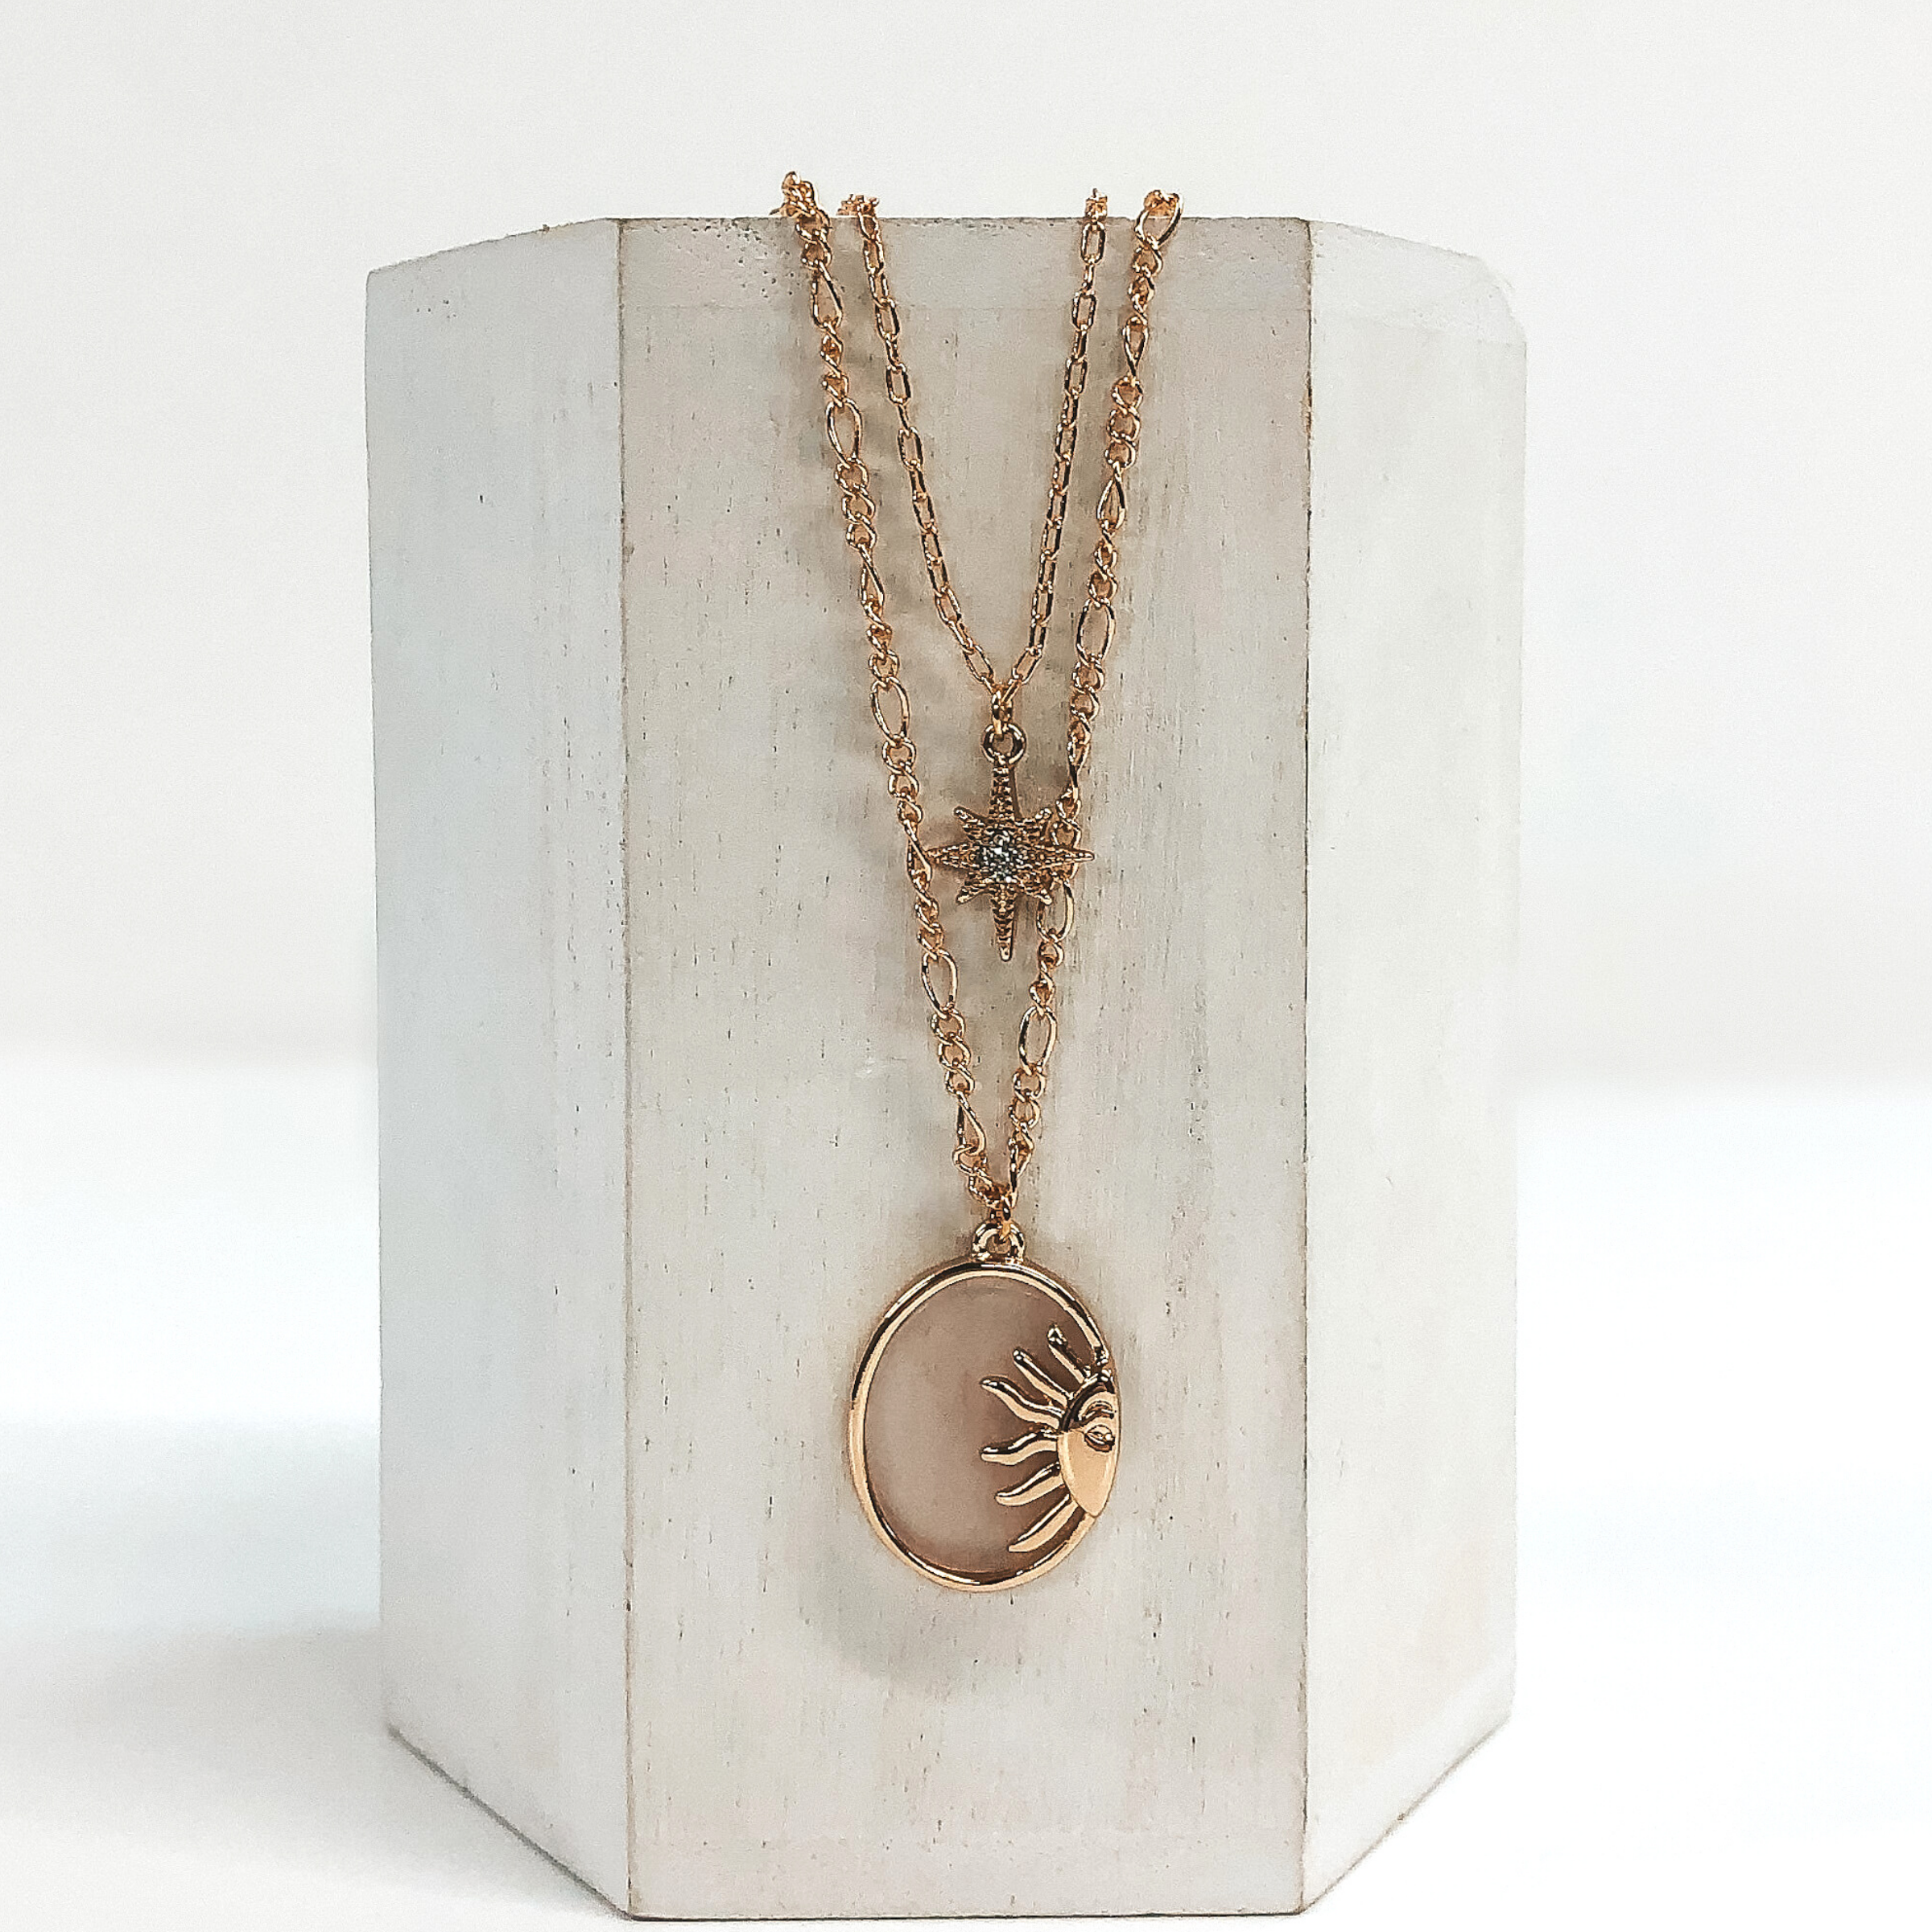 Double layered chain necklace in gold. The shorter strand has a gold star pendant with a center clear crystal and the longer strand has an oval opaque rose stone pendant with a half sun gold charm. This necklace is pictured hanging on a white block on a white background. 